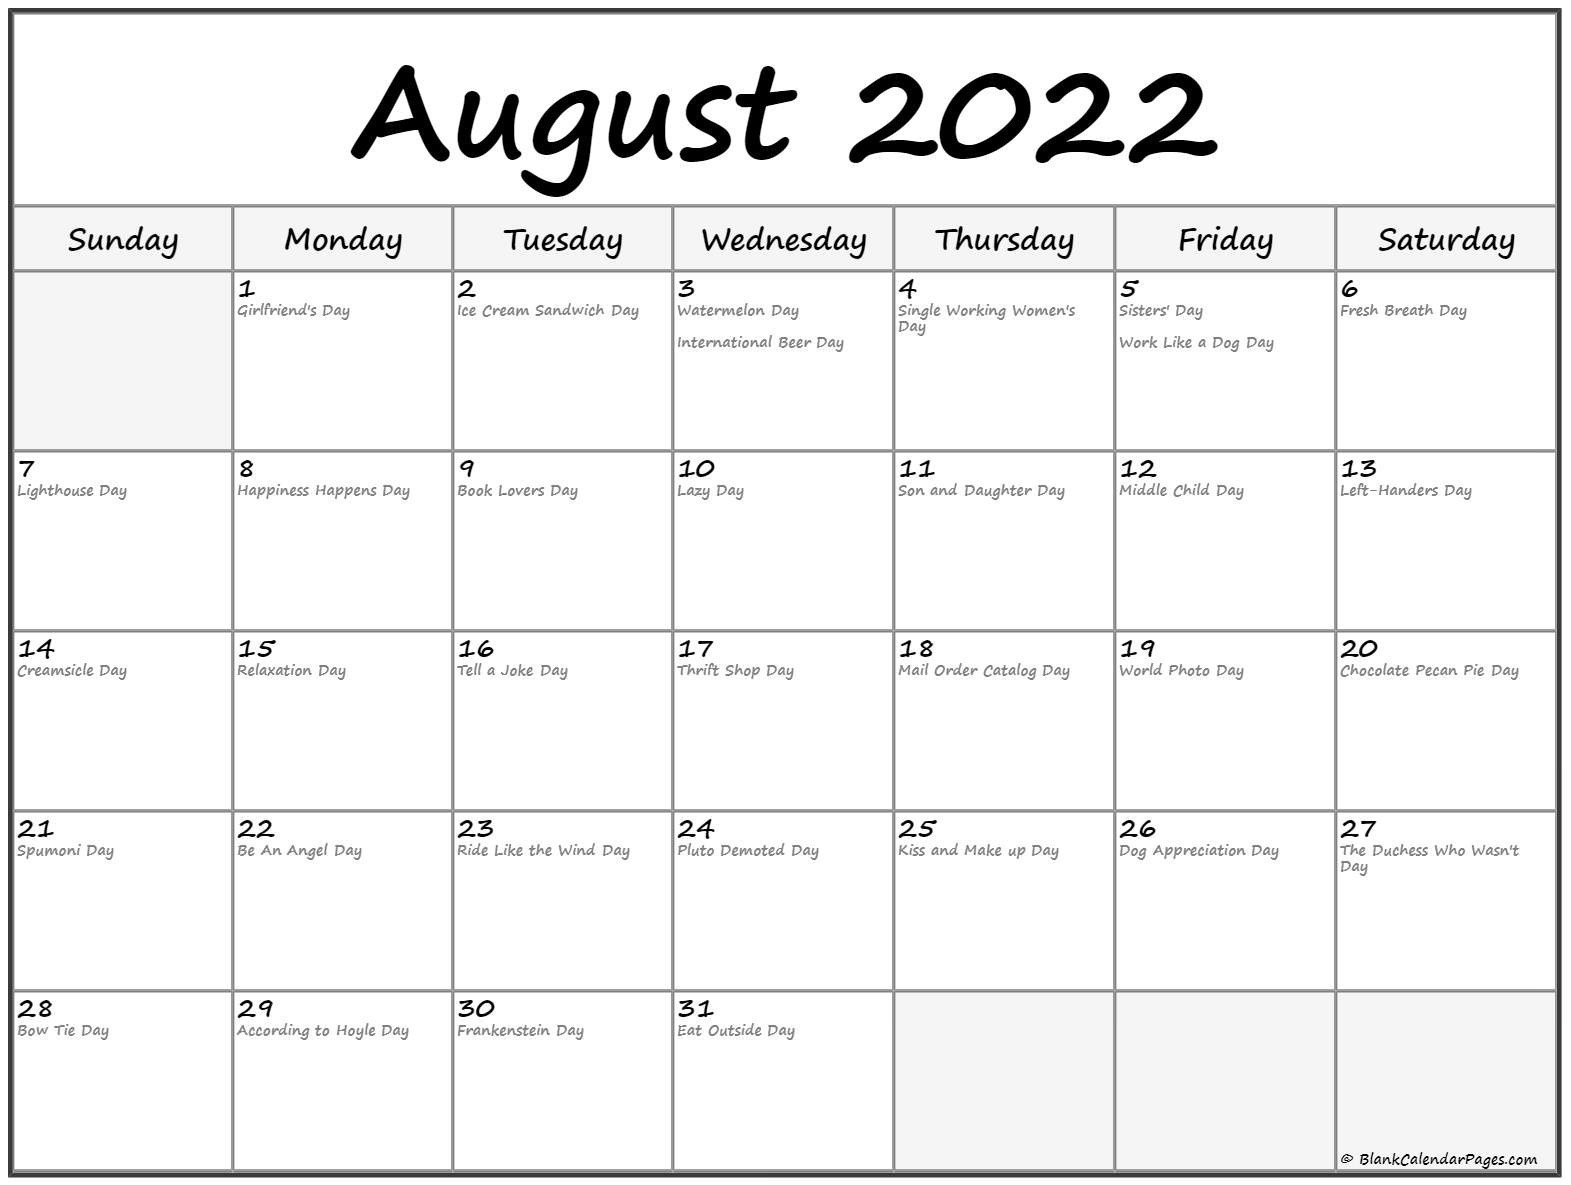 August 2022 Calendar With Holidays-Time And Date Calendar Canada 2022